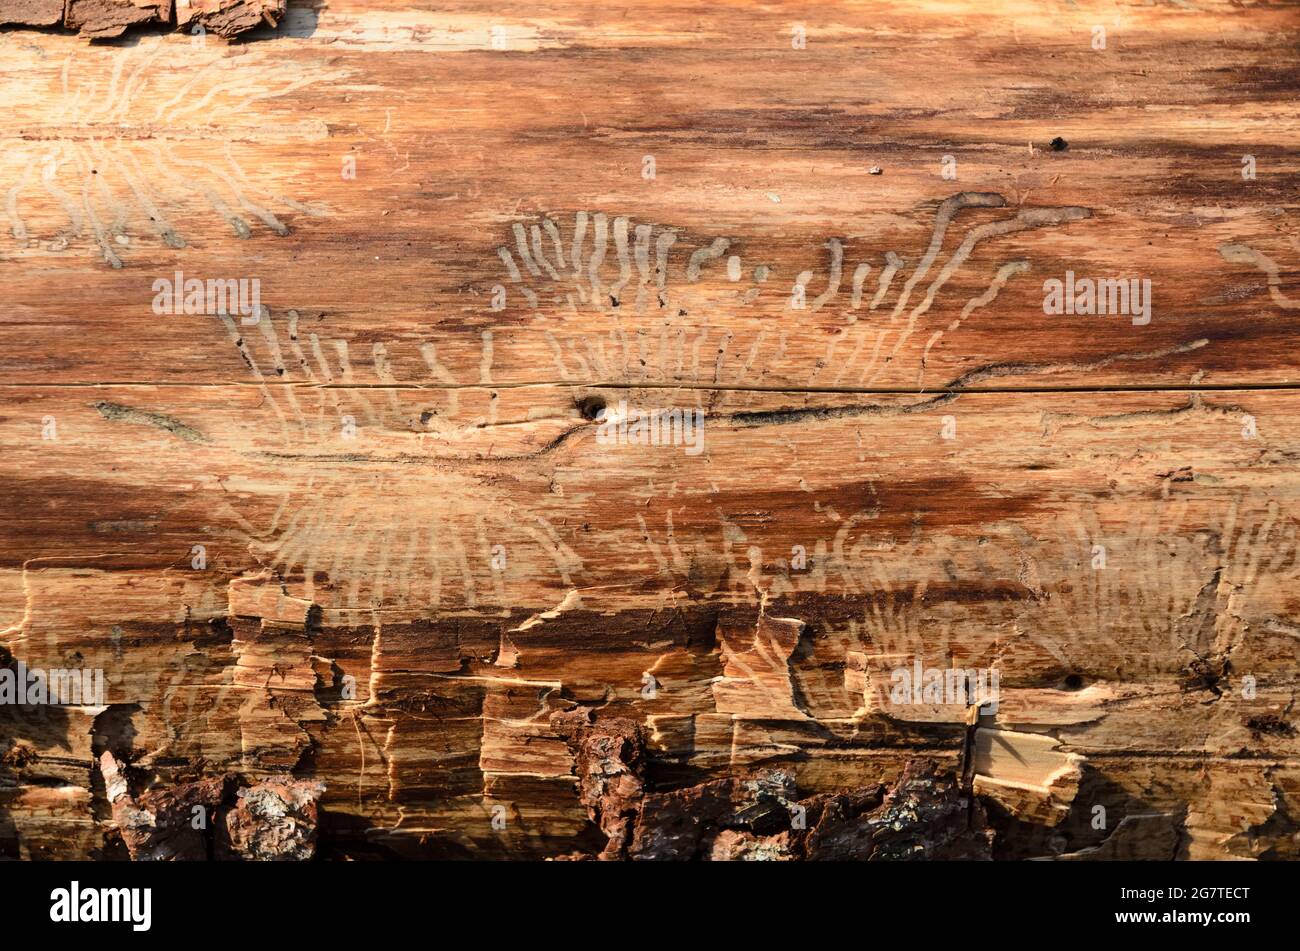 Wooden natural background of a felled tree trunk and feeding galleries, pest infested by bark beetle (Scolytinae), close-up view Stock Photo